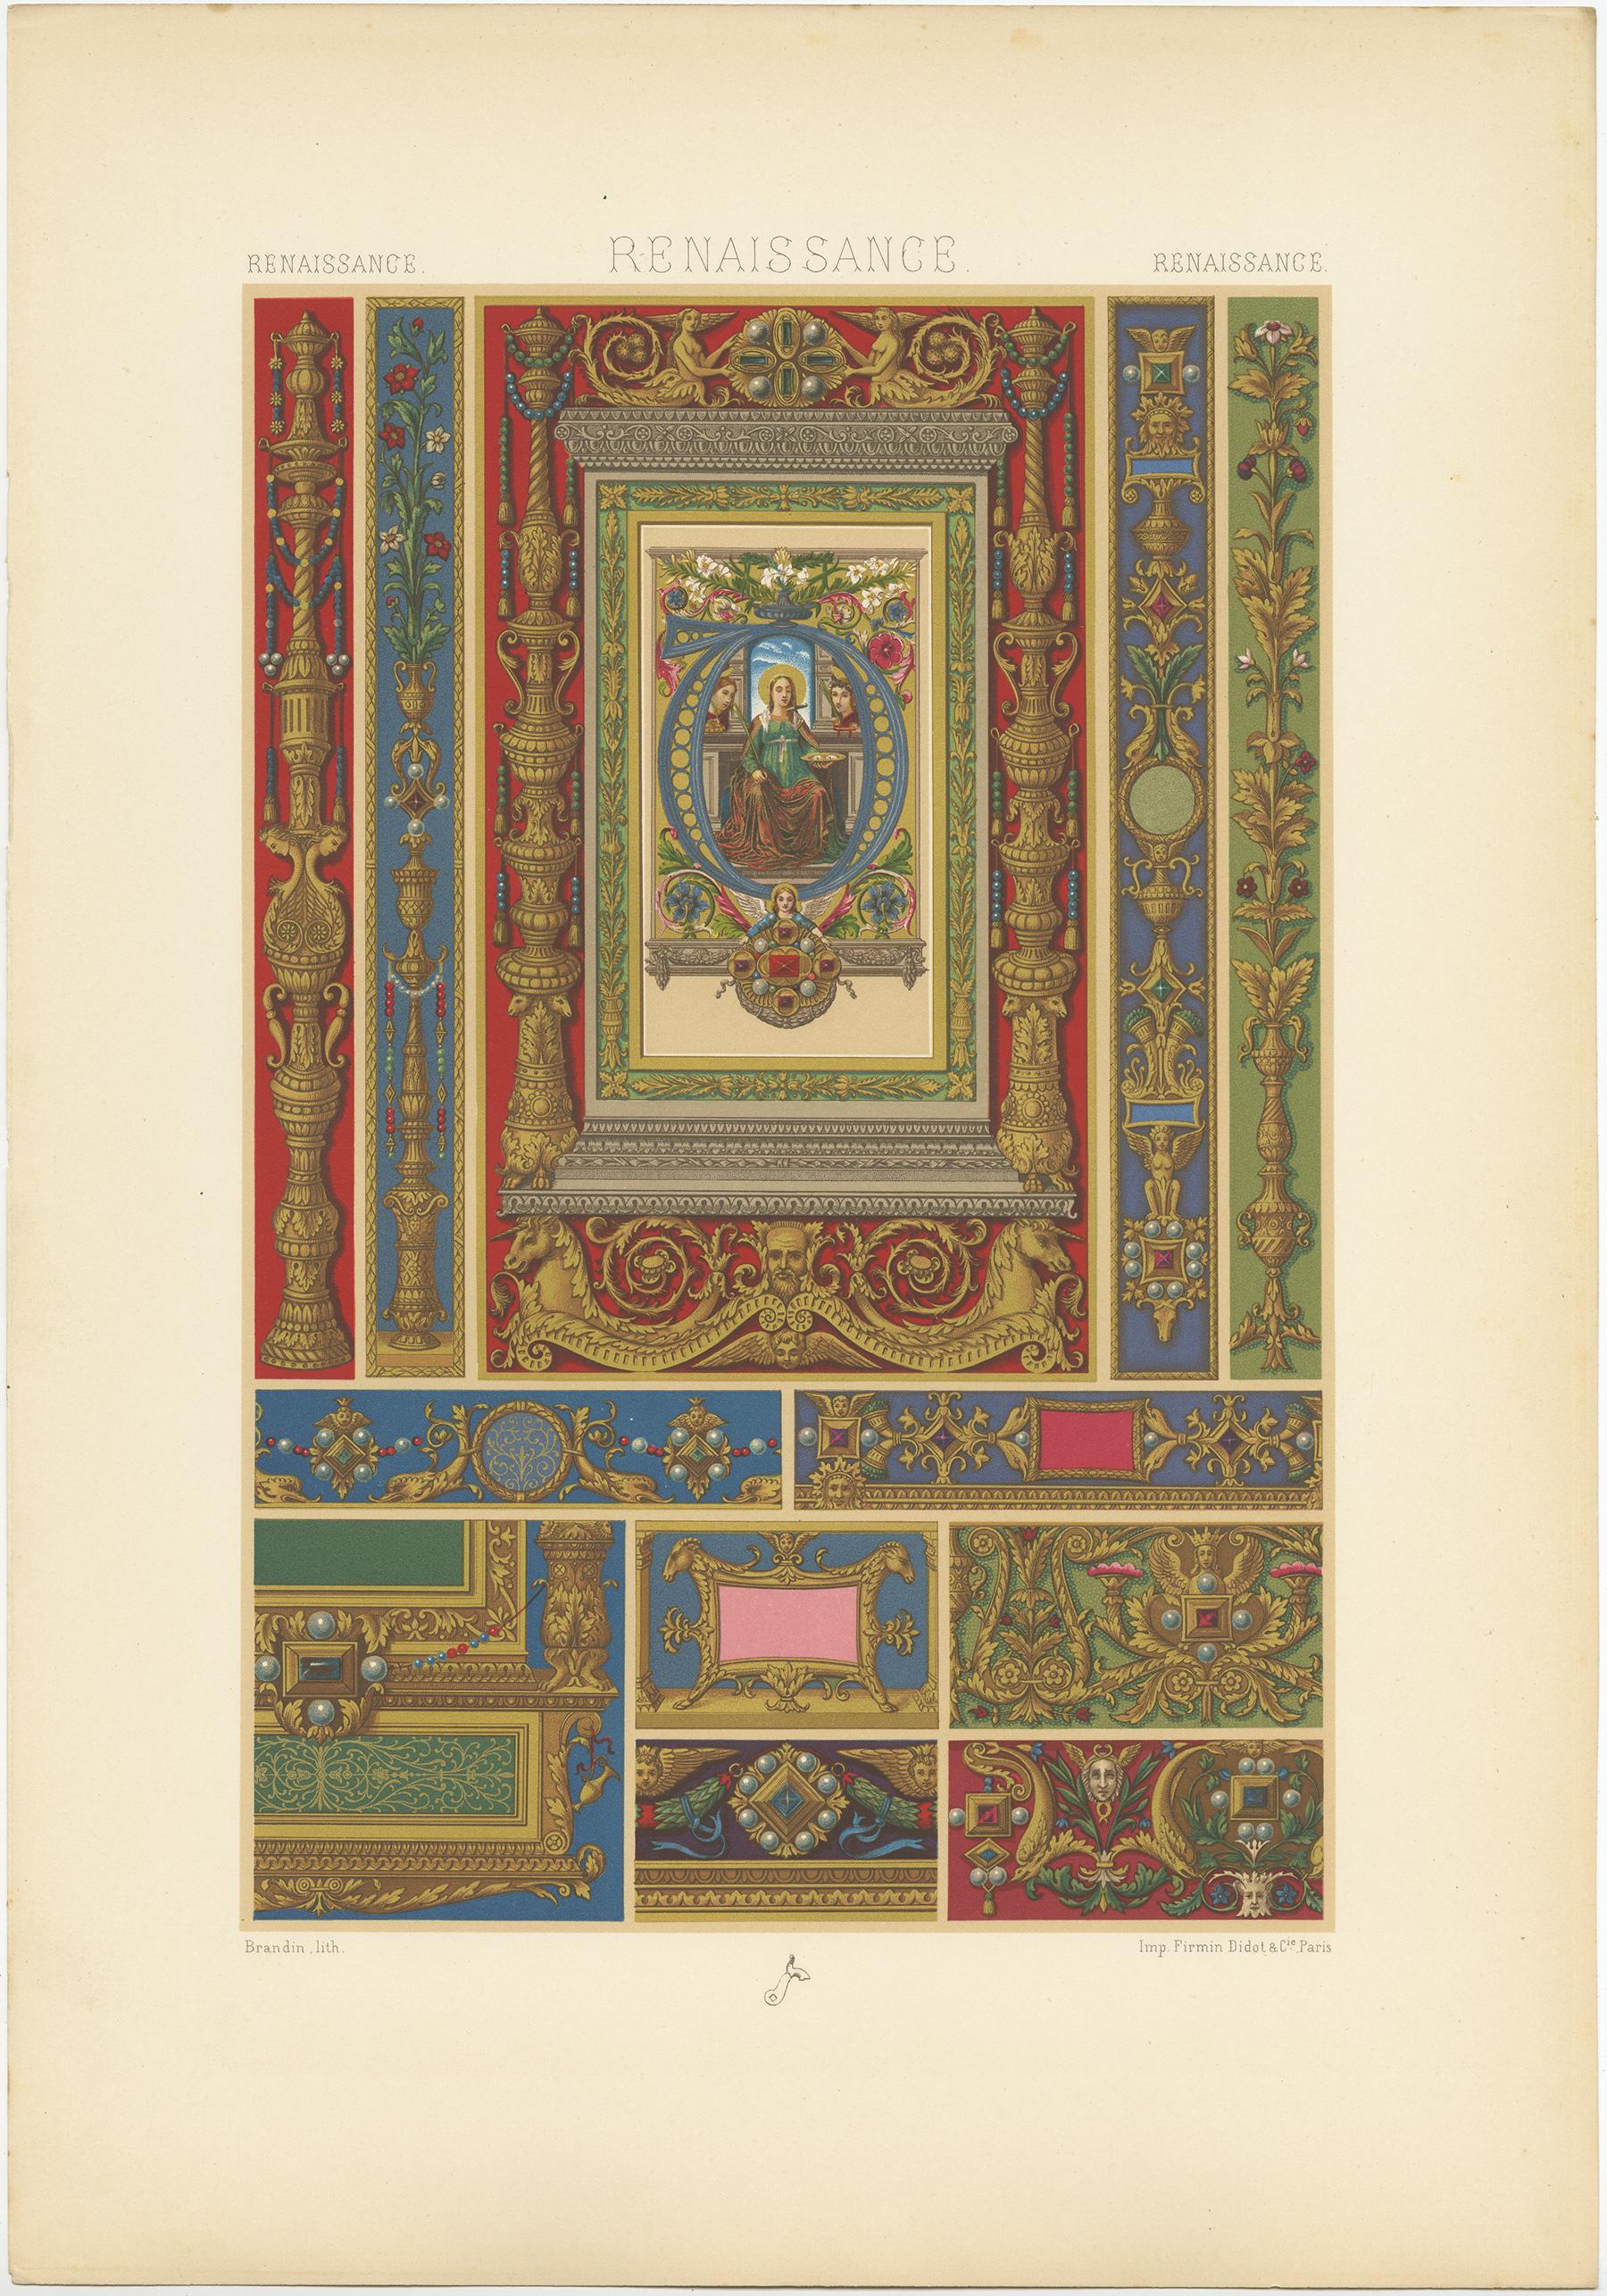 Antique print titled 'Renaissance - Renaissance - Renaissance'. Chromolithograph of jewelry designs from Italian manuscripts 15th and 16th centuries ornaments. This print originates from 'l'Ornement Polychrome' by Auguste Racinet. Published circa